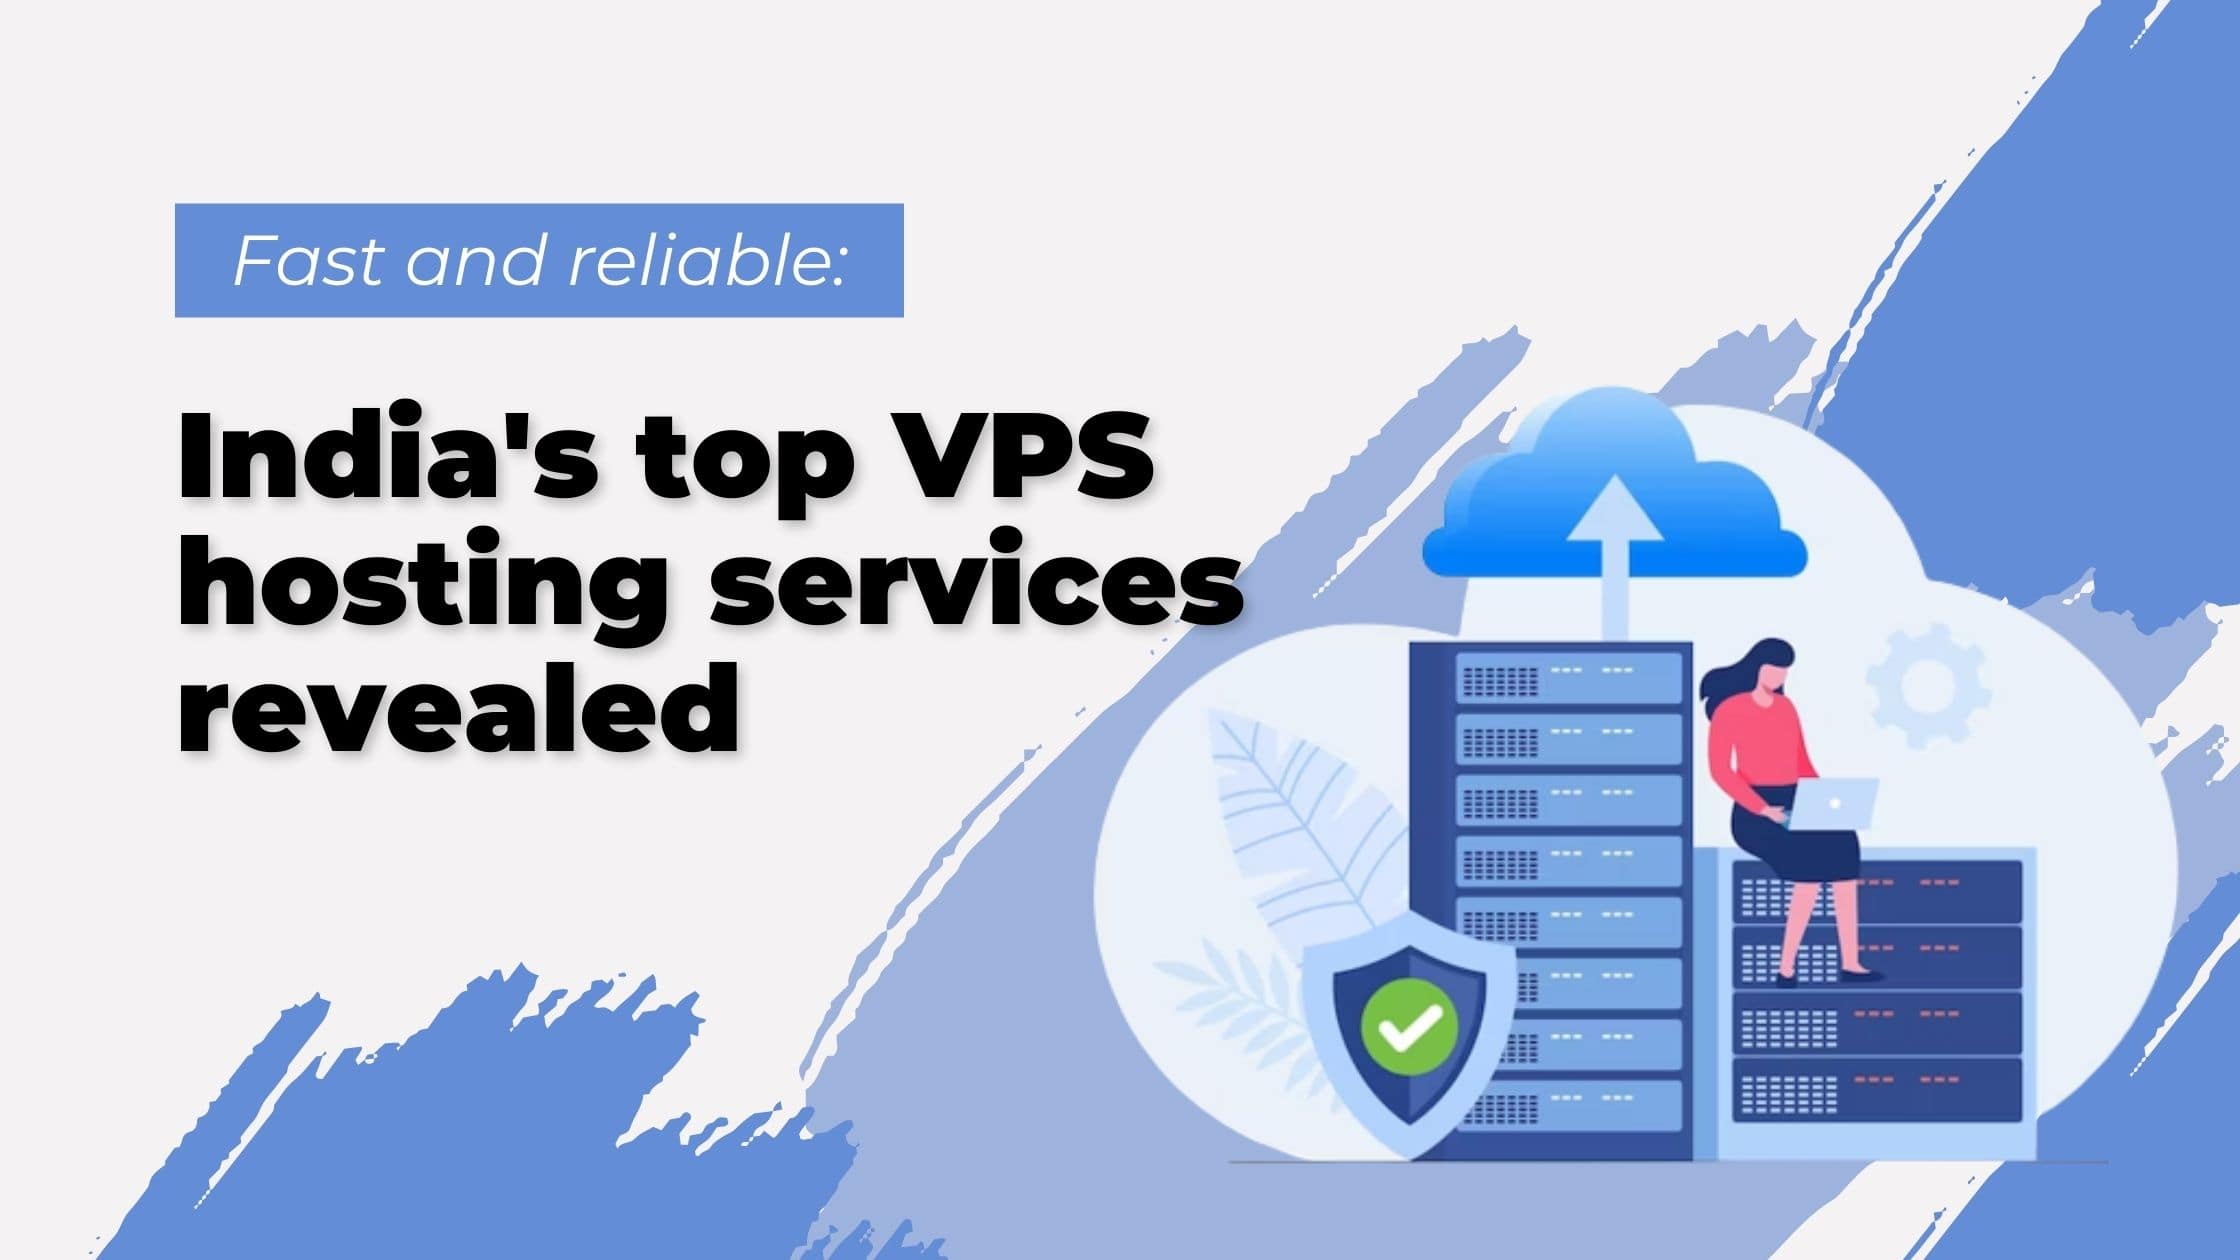 Fast and reliable: India’s top VPS hosting services revealed